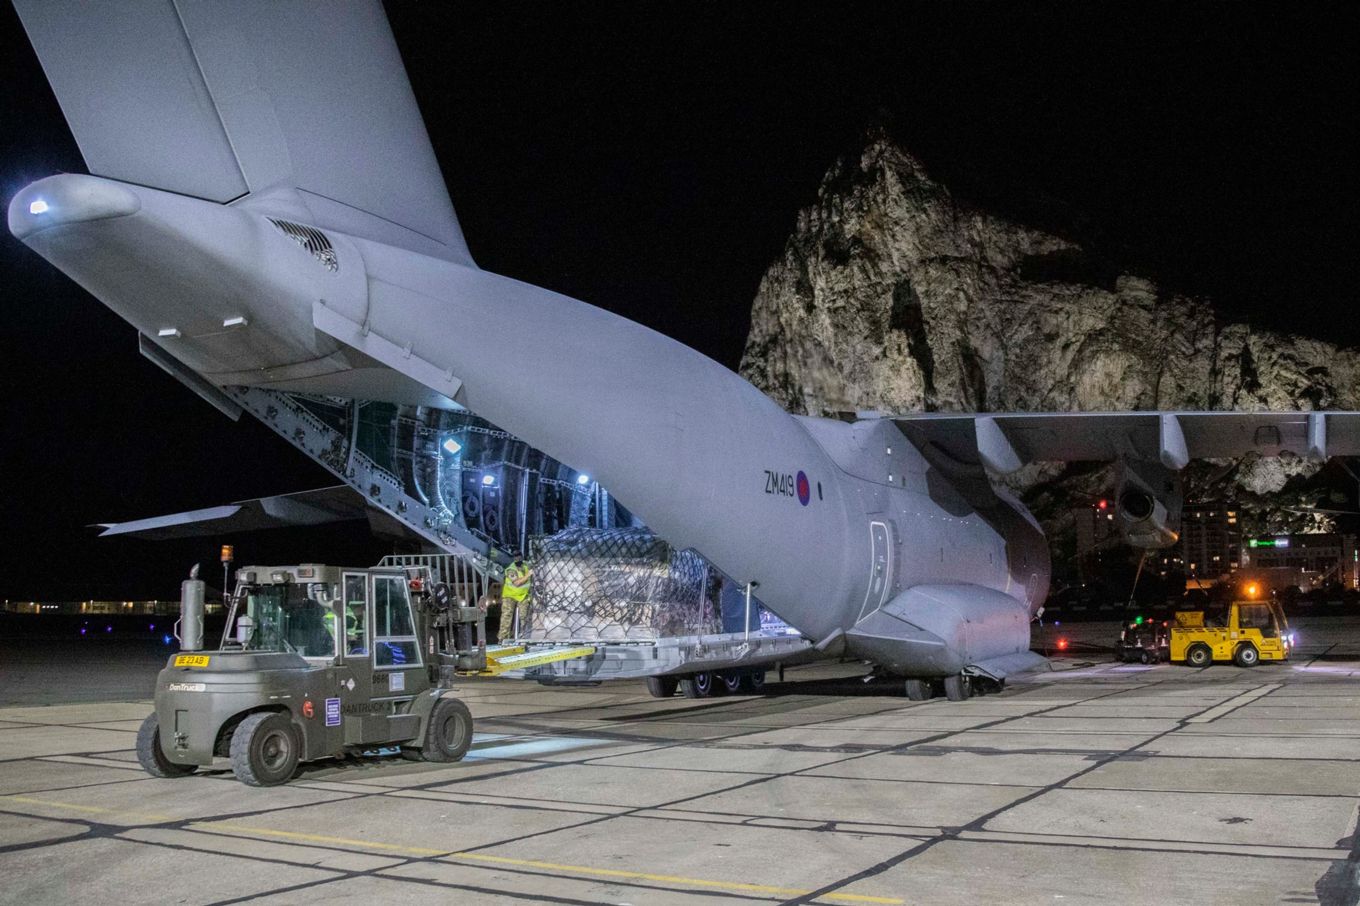 C-17 aircraft has its loading bay open with mover vehicles.